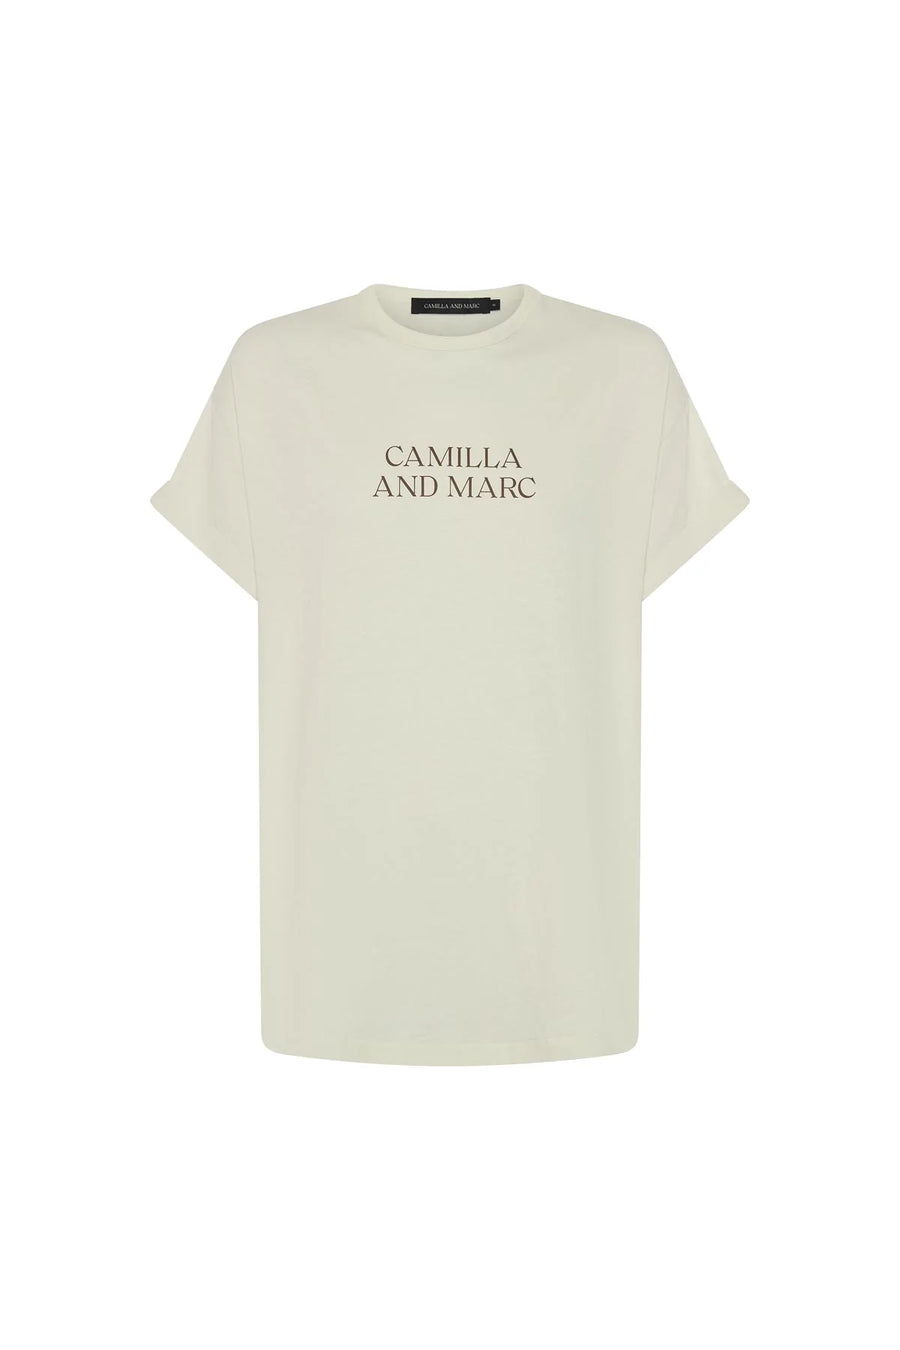 C&M - CAMILLA AND MARC HUNTINGTON 3.0 TEE IN CLOUD